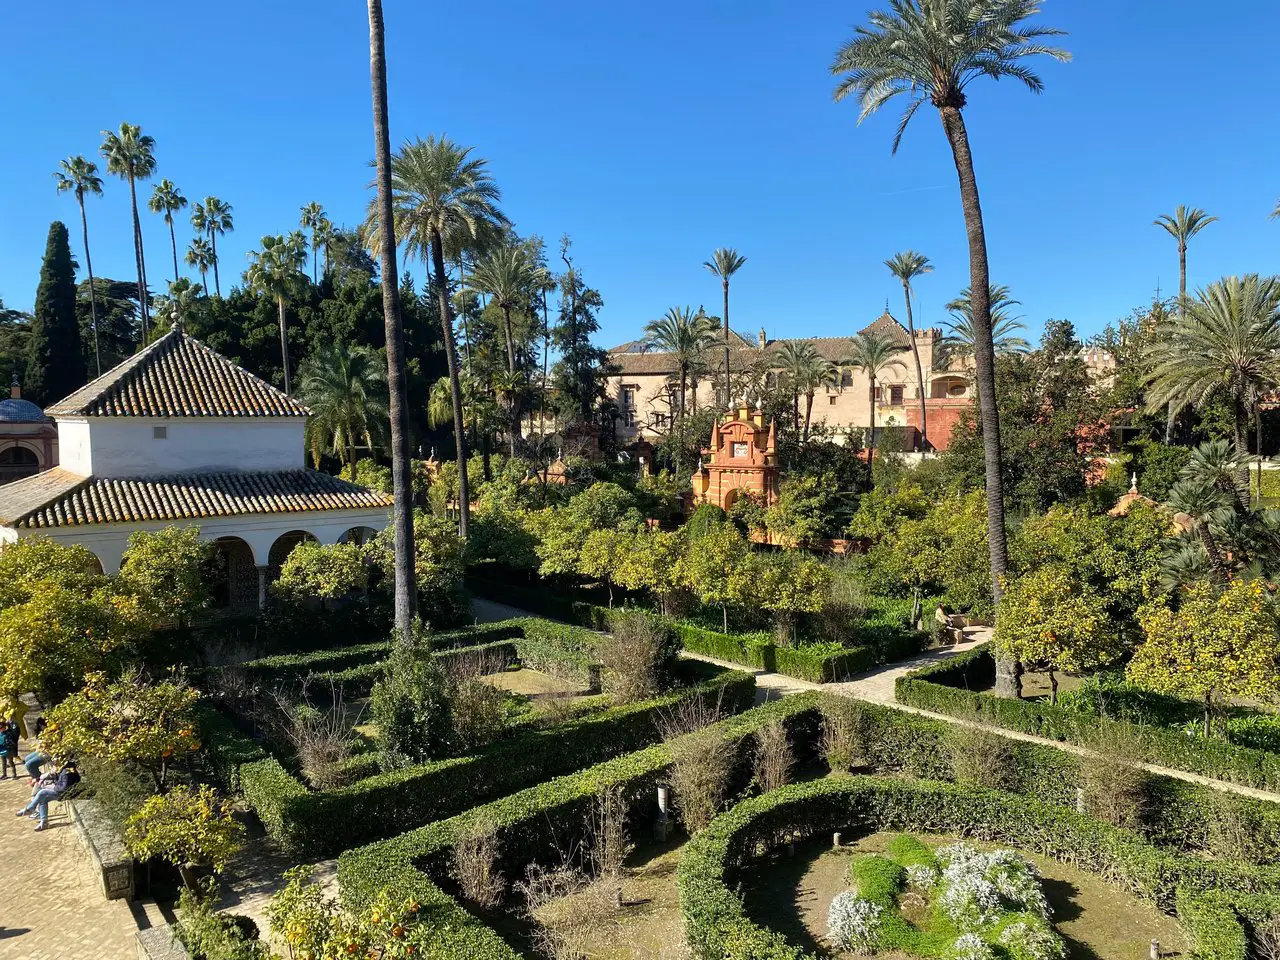 Gardens, including a small maze, at the Seville Alcazar, one of the best things to do on this 2 days in Seville itinerary.